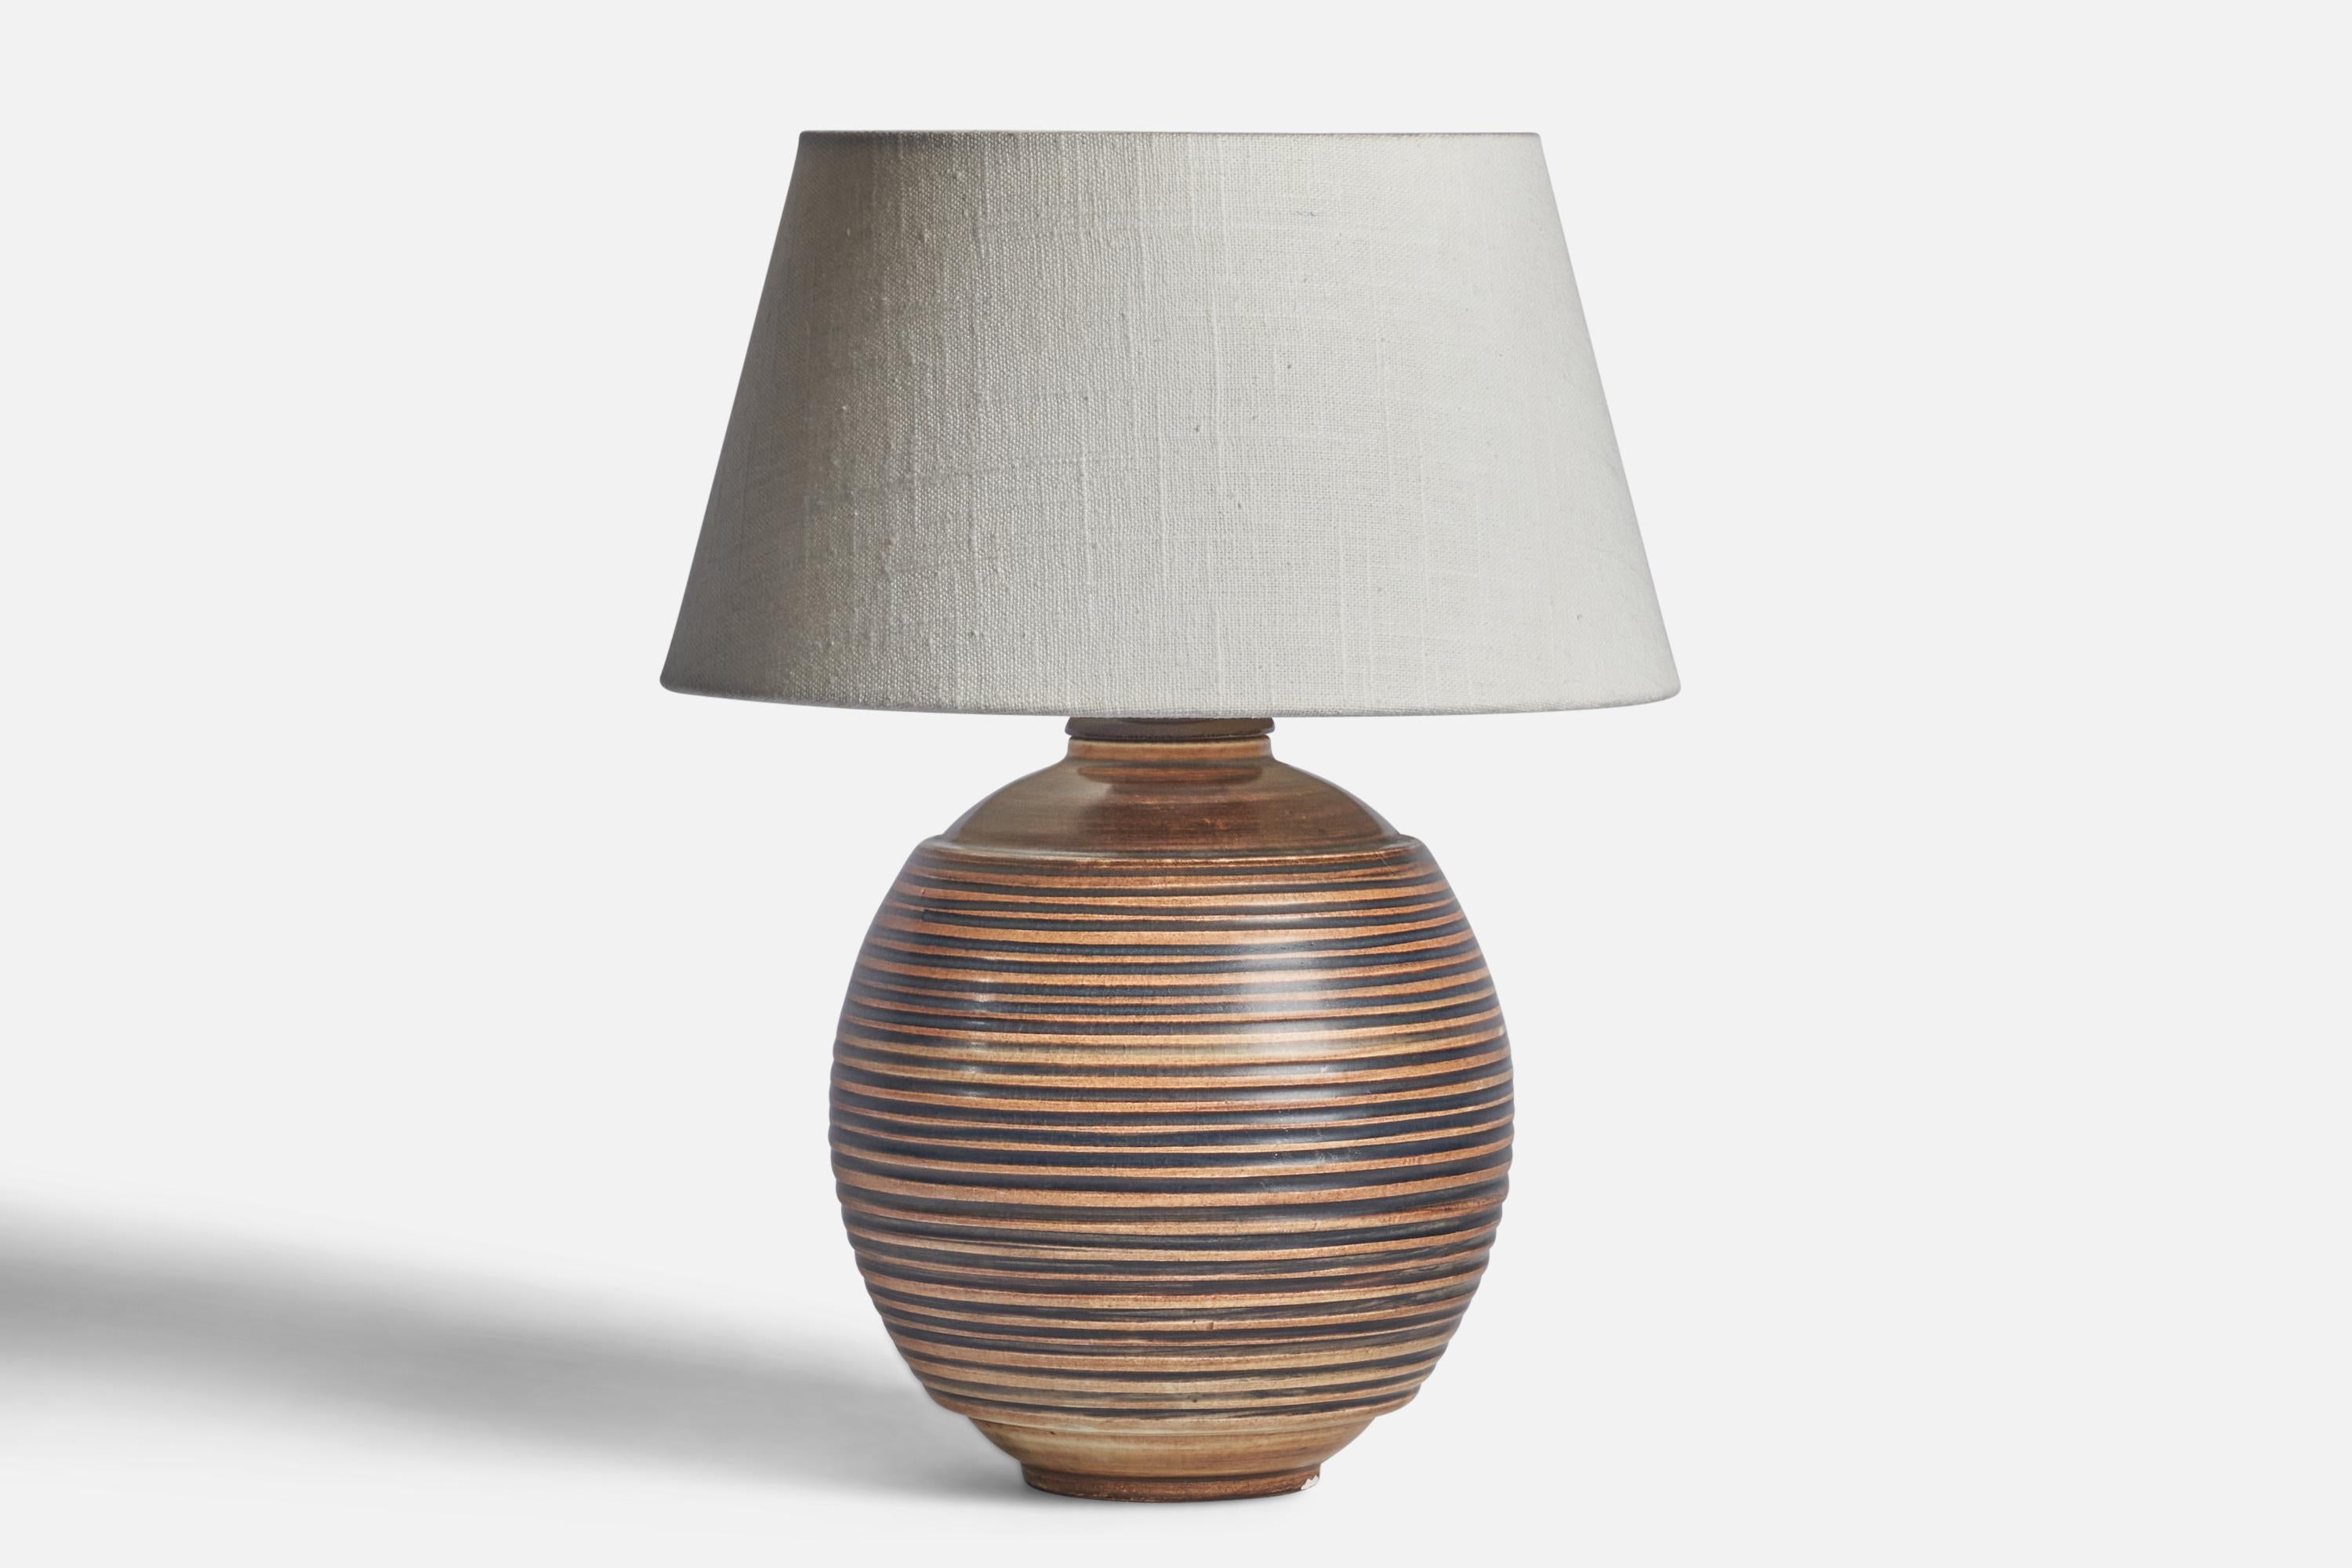 A brown-glazed incised stoneware table lamp designed by Gertrud Lönegren and produced by Rörstrand, Sweden, 1940s.

Dimensions of Lamp (inches): 10” H x 6.5” Diameter
Dimensions of Shade (inches): 7” Top Diameter x 10” Bottom Diameter x